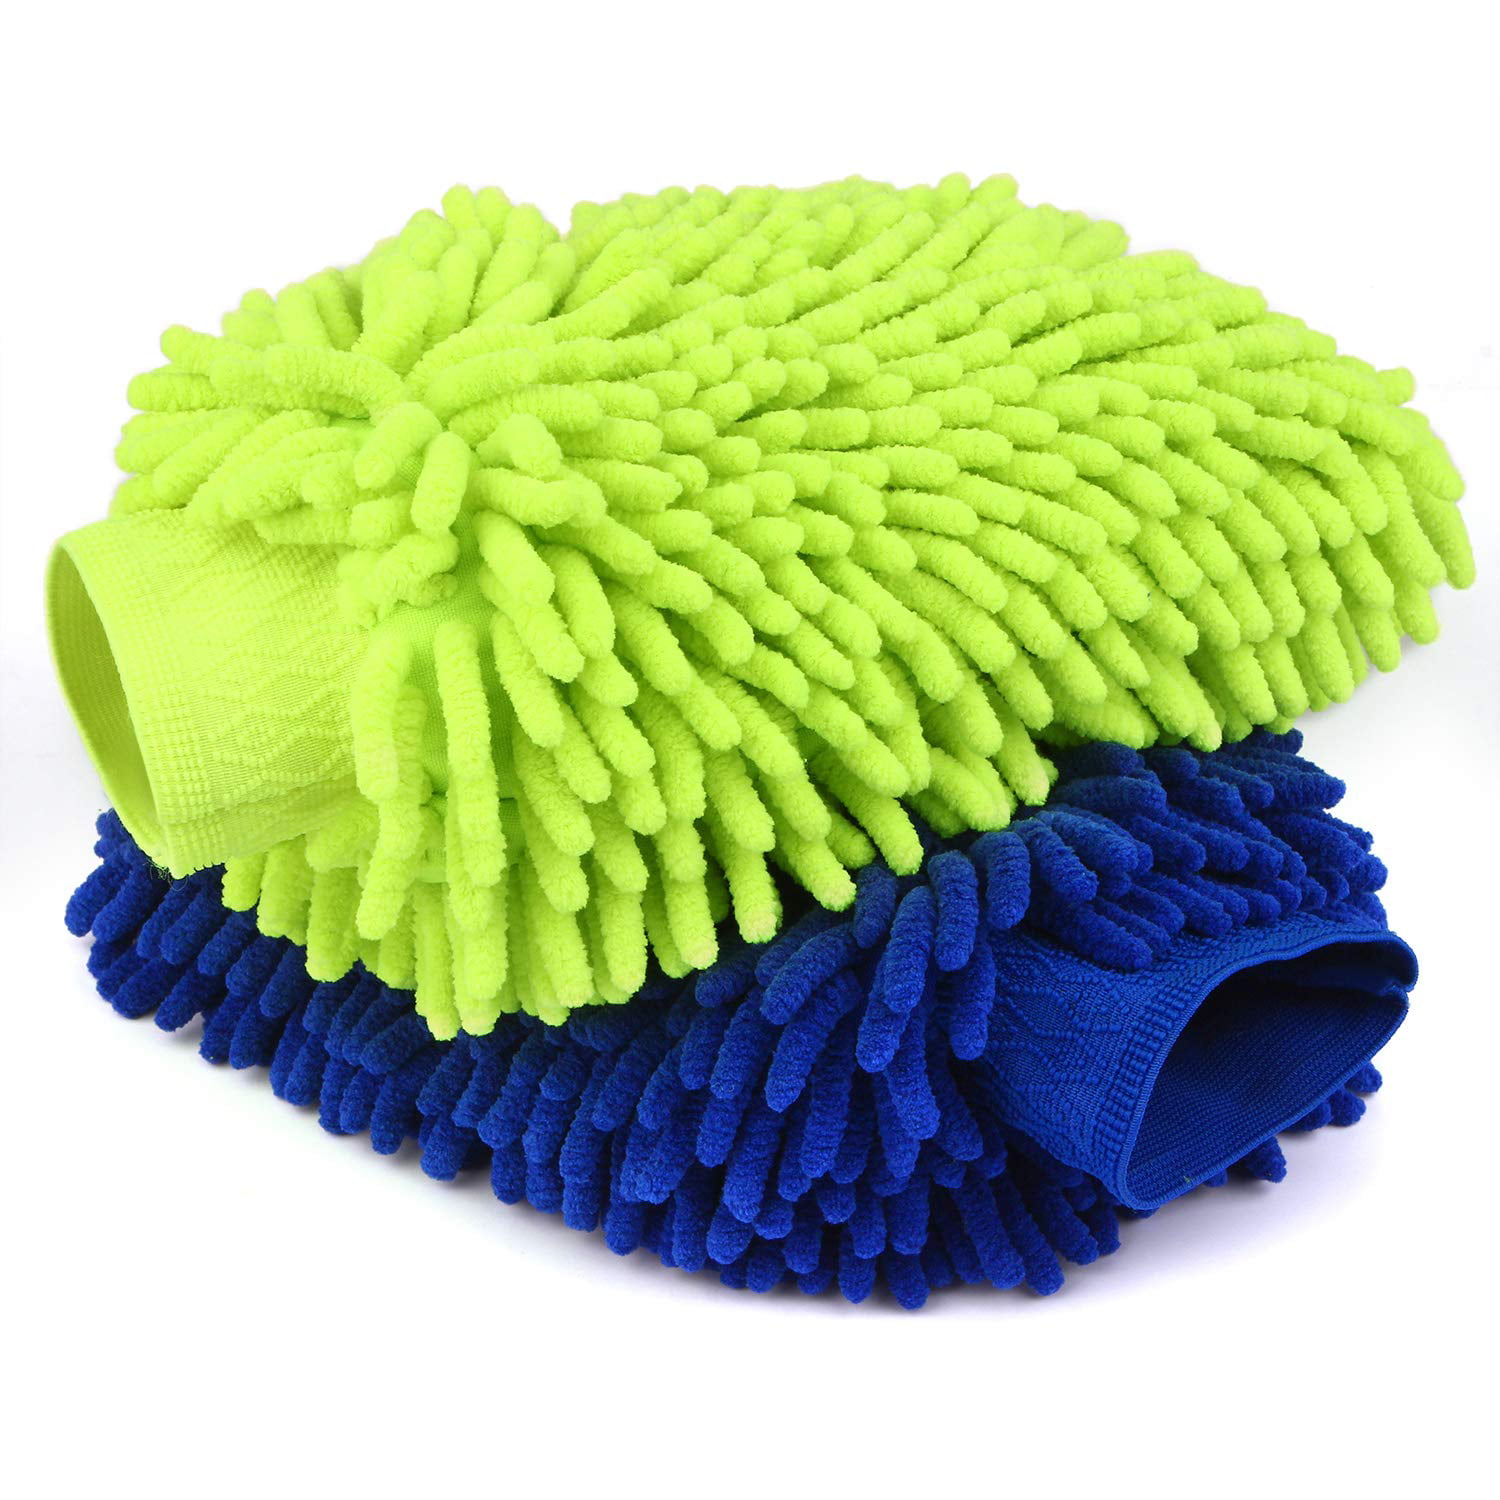 Blue Dssiy Car Wash Mitt,Extra Large Size Premium Microfiber Chenille Super Absorbent Wash and Wax Glove 